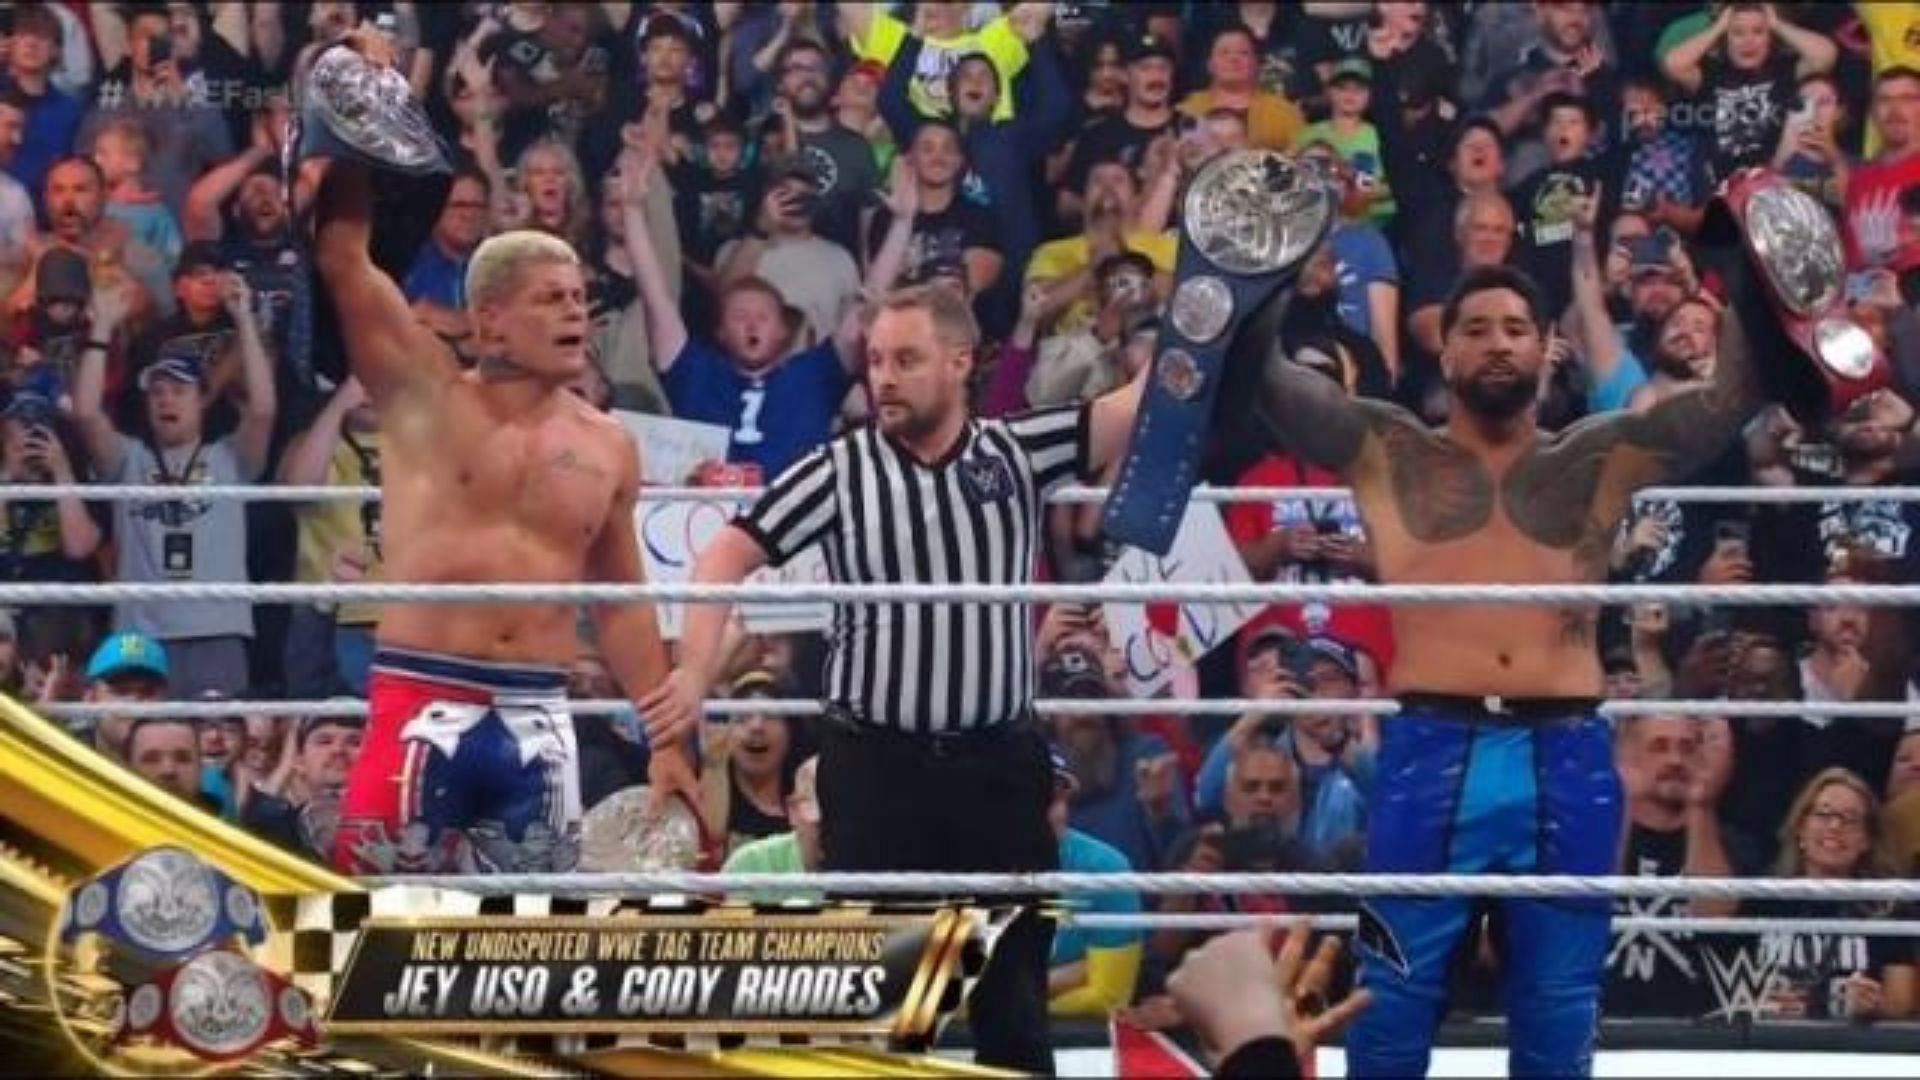 Cody Rhodes and Jey Uso won the tag team titles at Fastlane